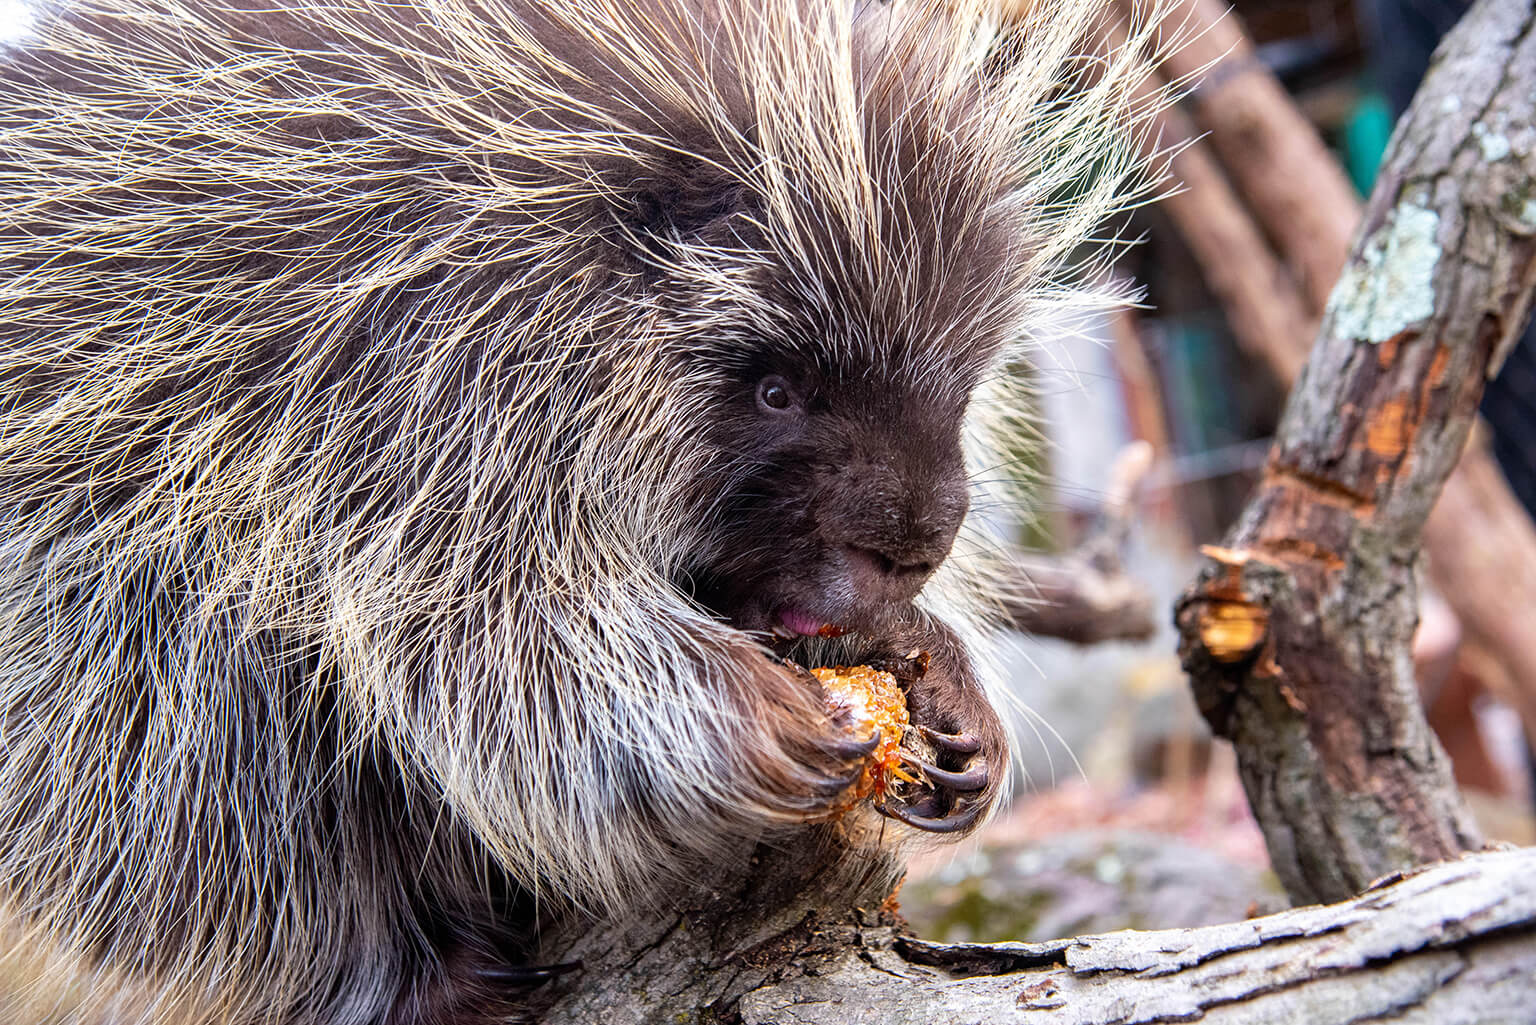 North American Porcupine | The Maryland Zoo